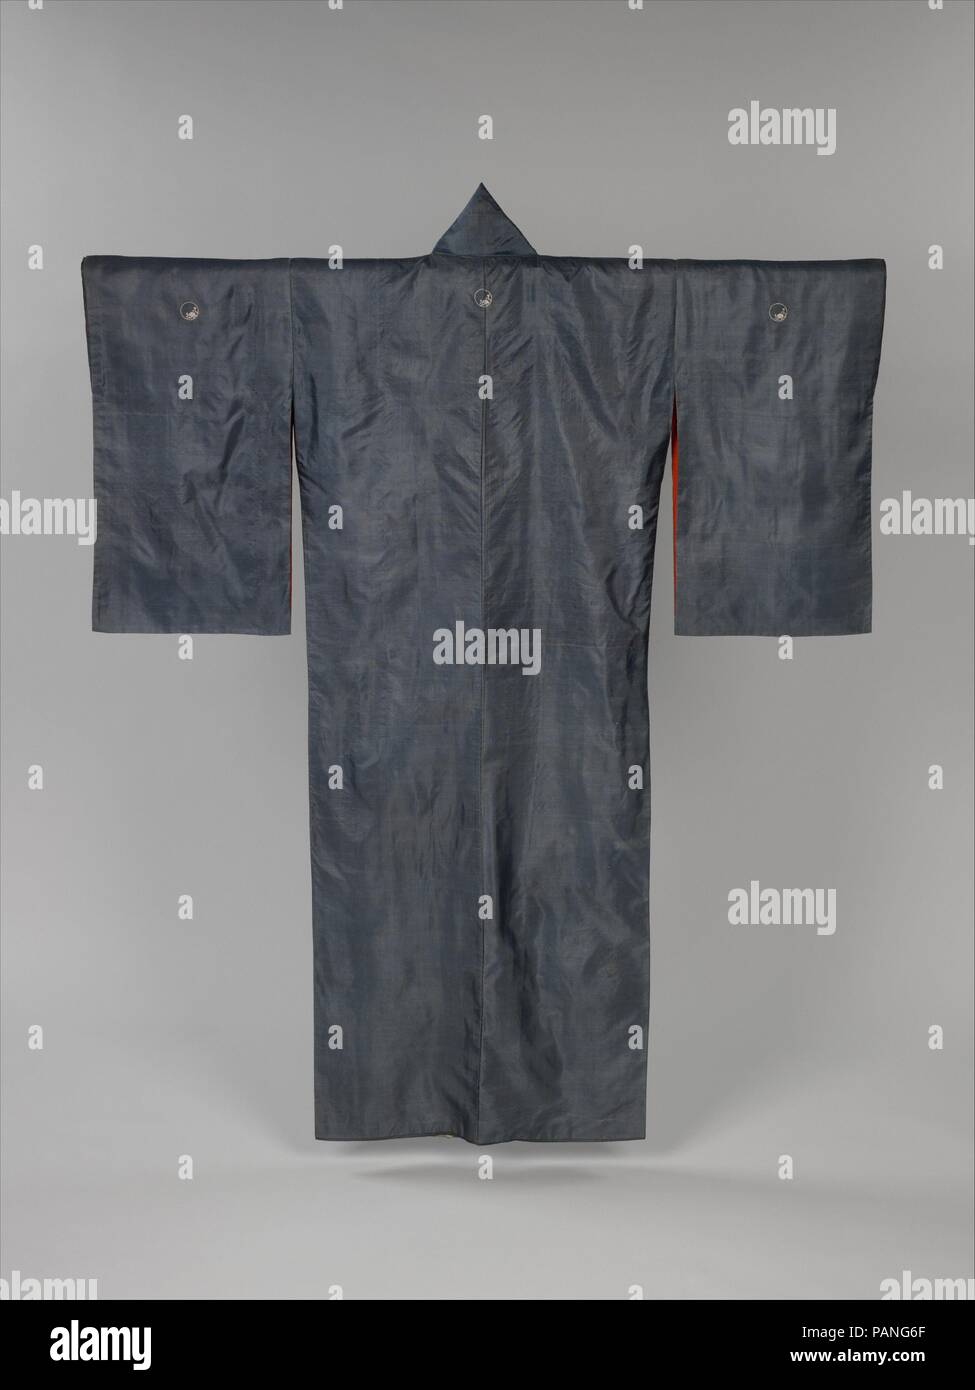 Kimono with Blossoming Plum Tree. Culture: Japan. Dimensions: Overall: 62 × 49 in. (157.5 × 124.5 cm). Date: second half of the 19th century.  Paste-resist dyeing, along with skillful use of a shading technique, finely renders the gradual progression from white to dark gray on this garment. Early Meiji period kimonos often have gray or black grounds and decoration concentrated along the hemline. Here, the plum tree, painted in ink and pigments and embroidered with silk and occasional glints of gold, seems to glow in soft moonlight, while the rest of the robe is in shadow. The design scheme is  Stock Photo